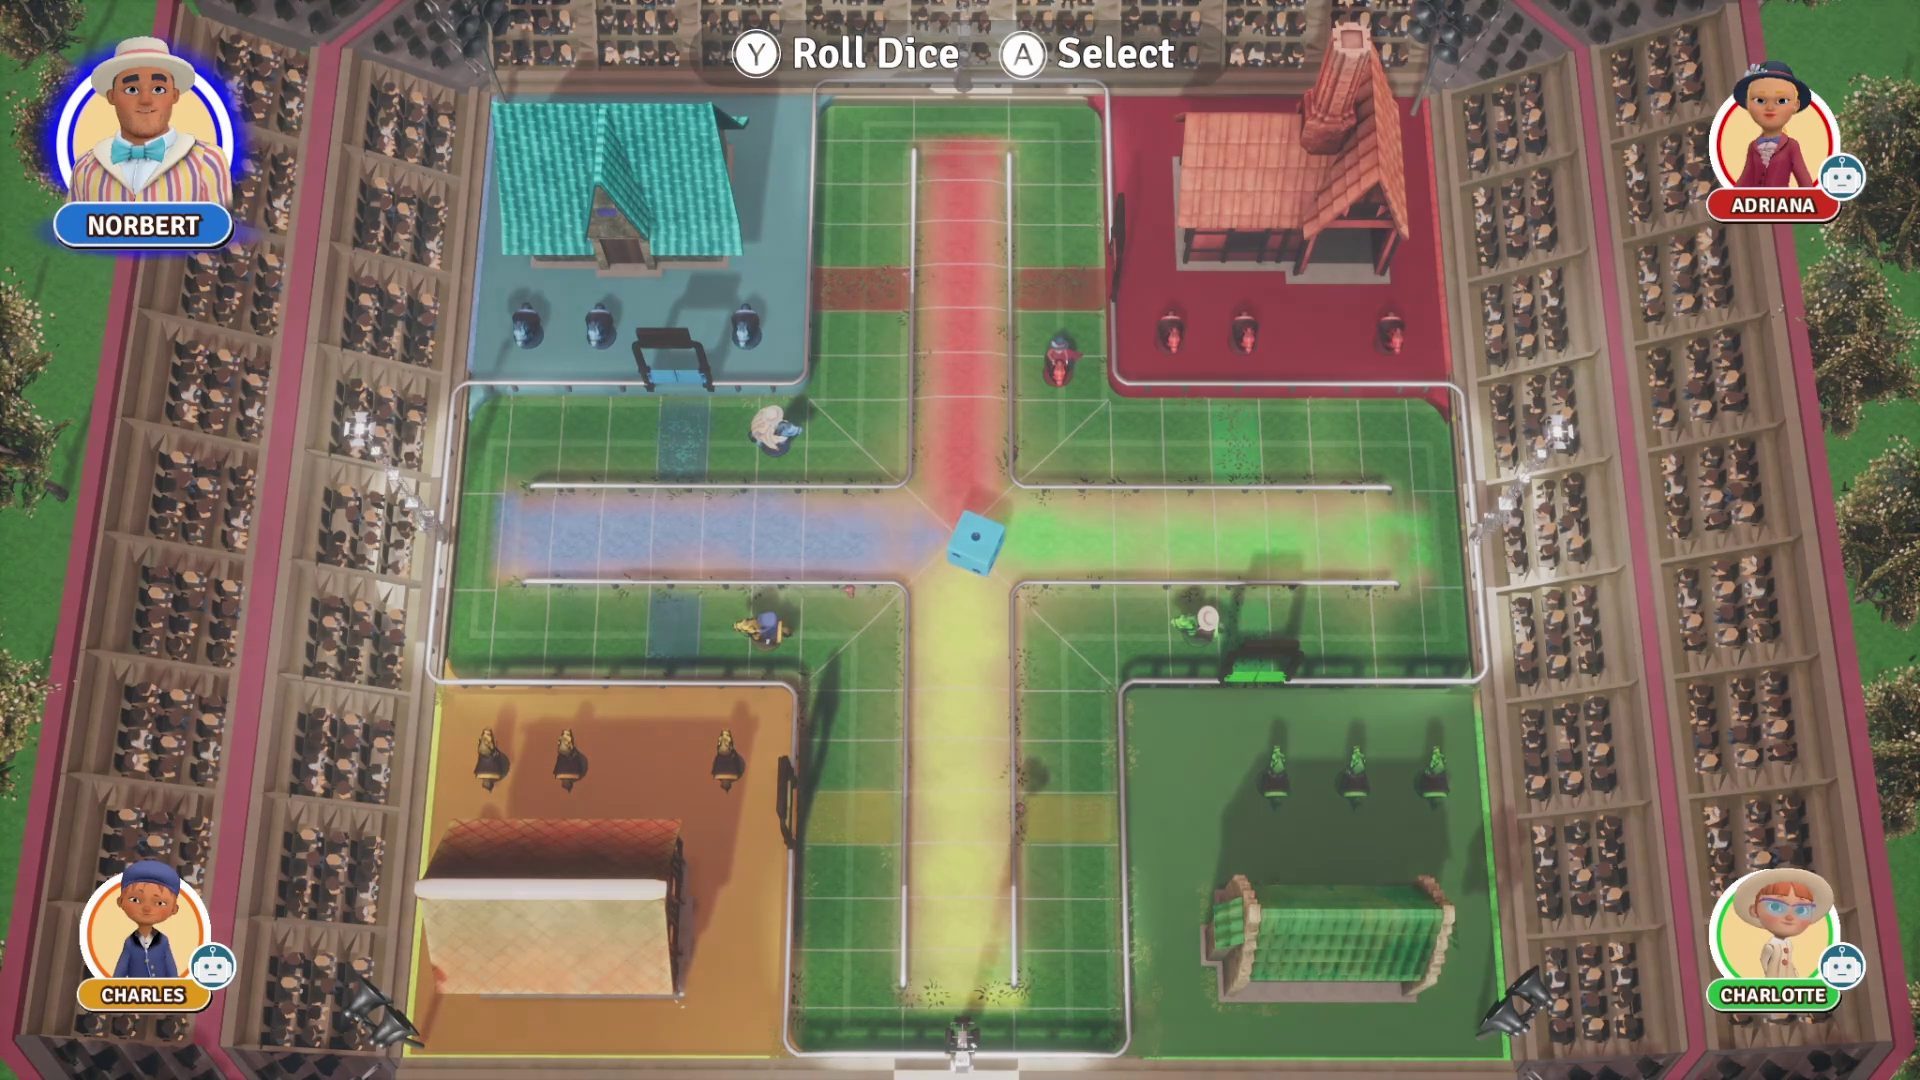 Clubhouse Games is the family board game night on the Switch I needed - CNET